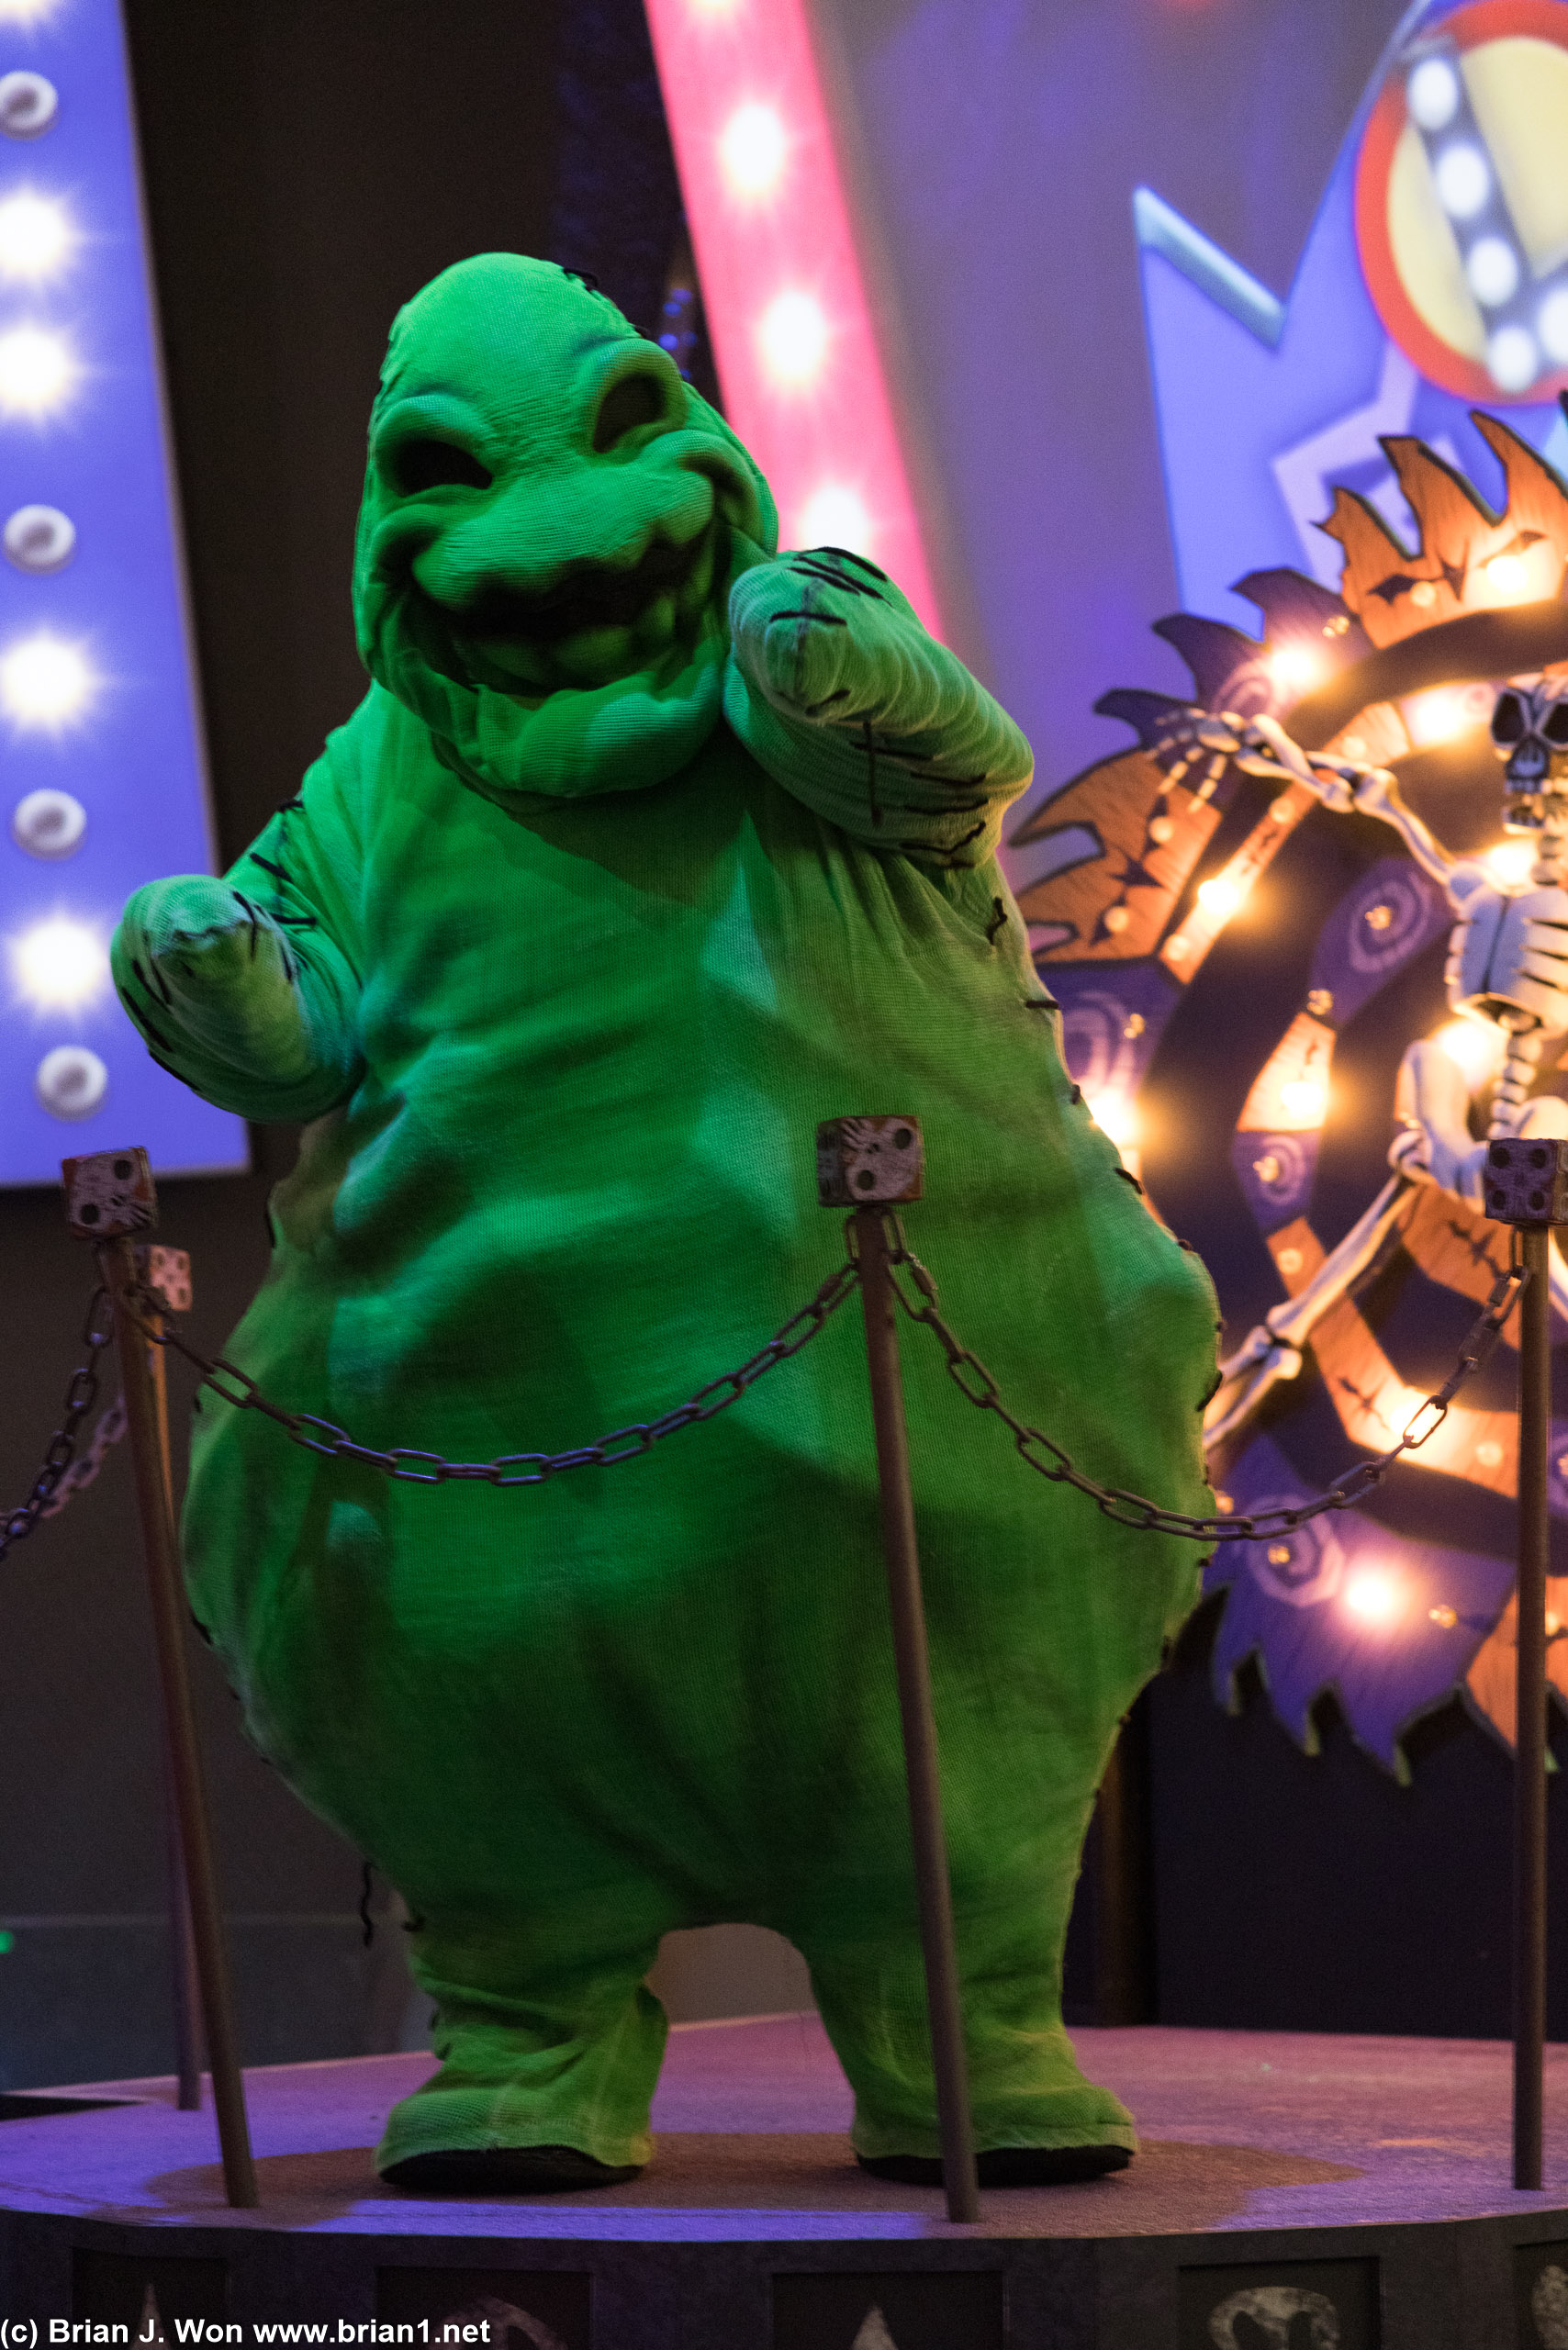 Oogie Boogie himself, from The Nightmare Before Christmas.